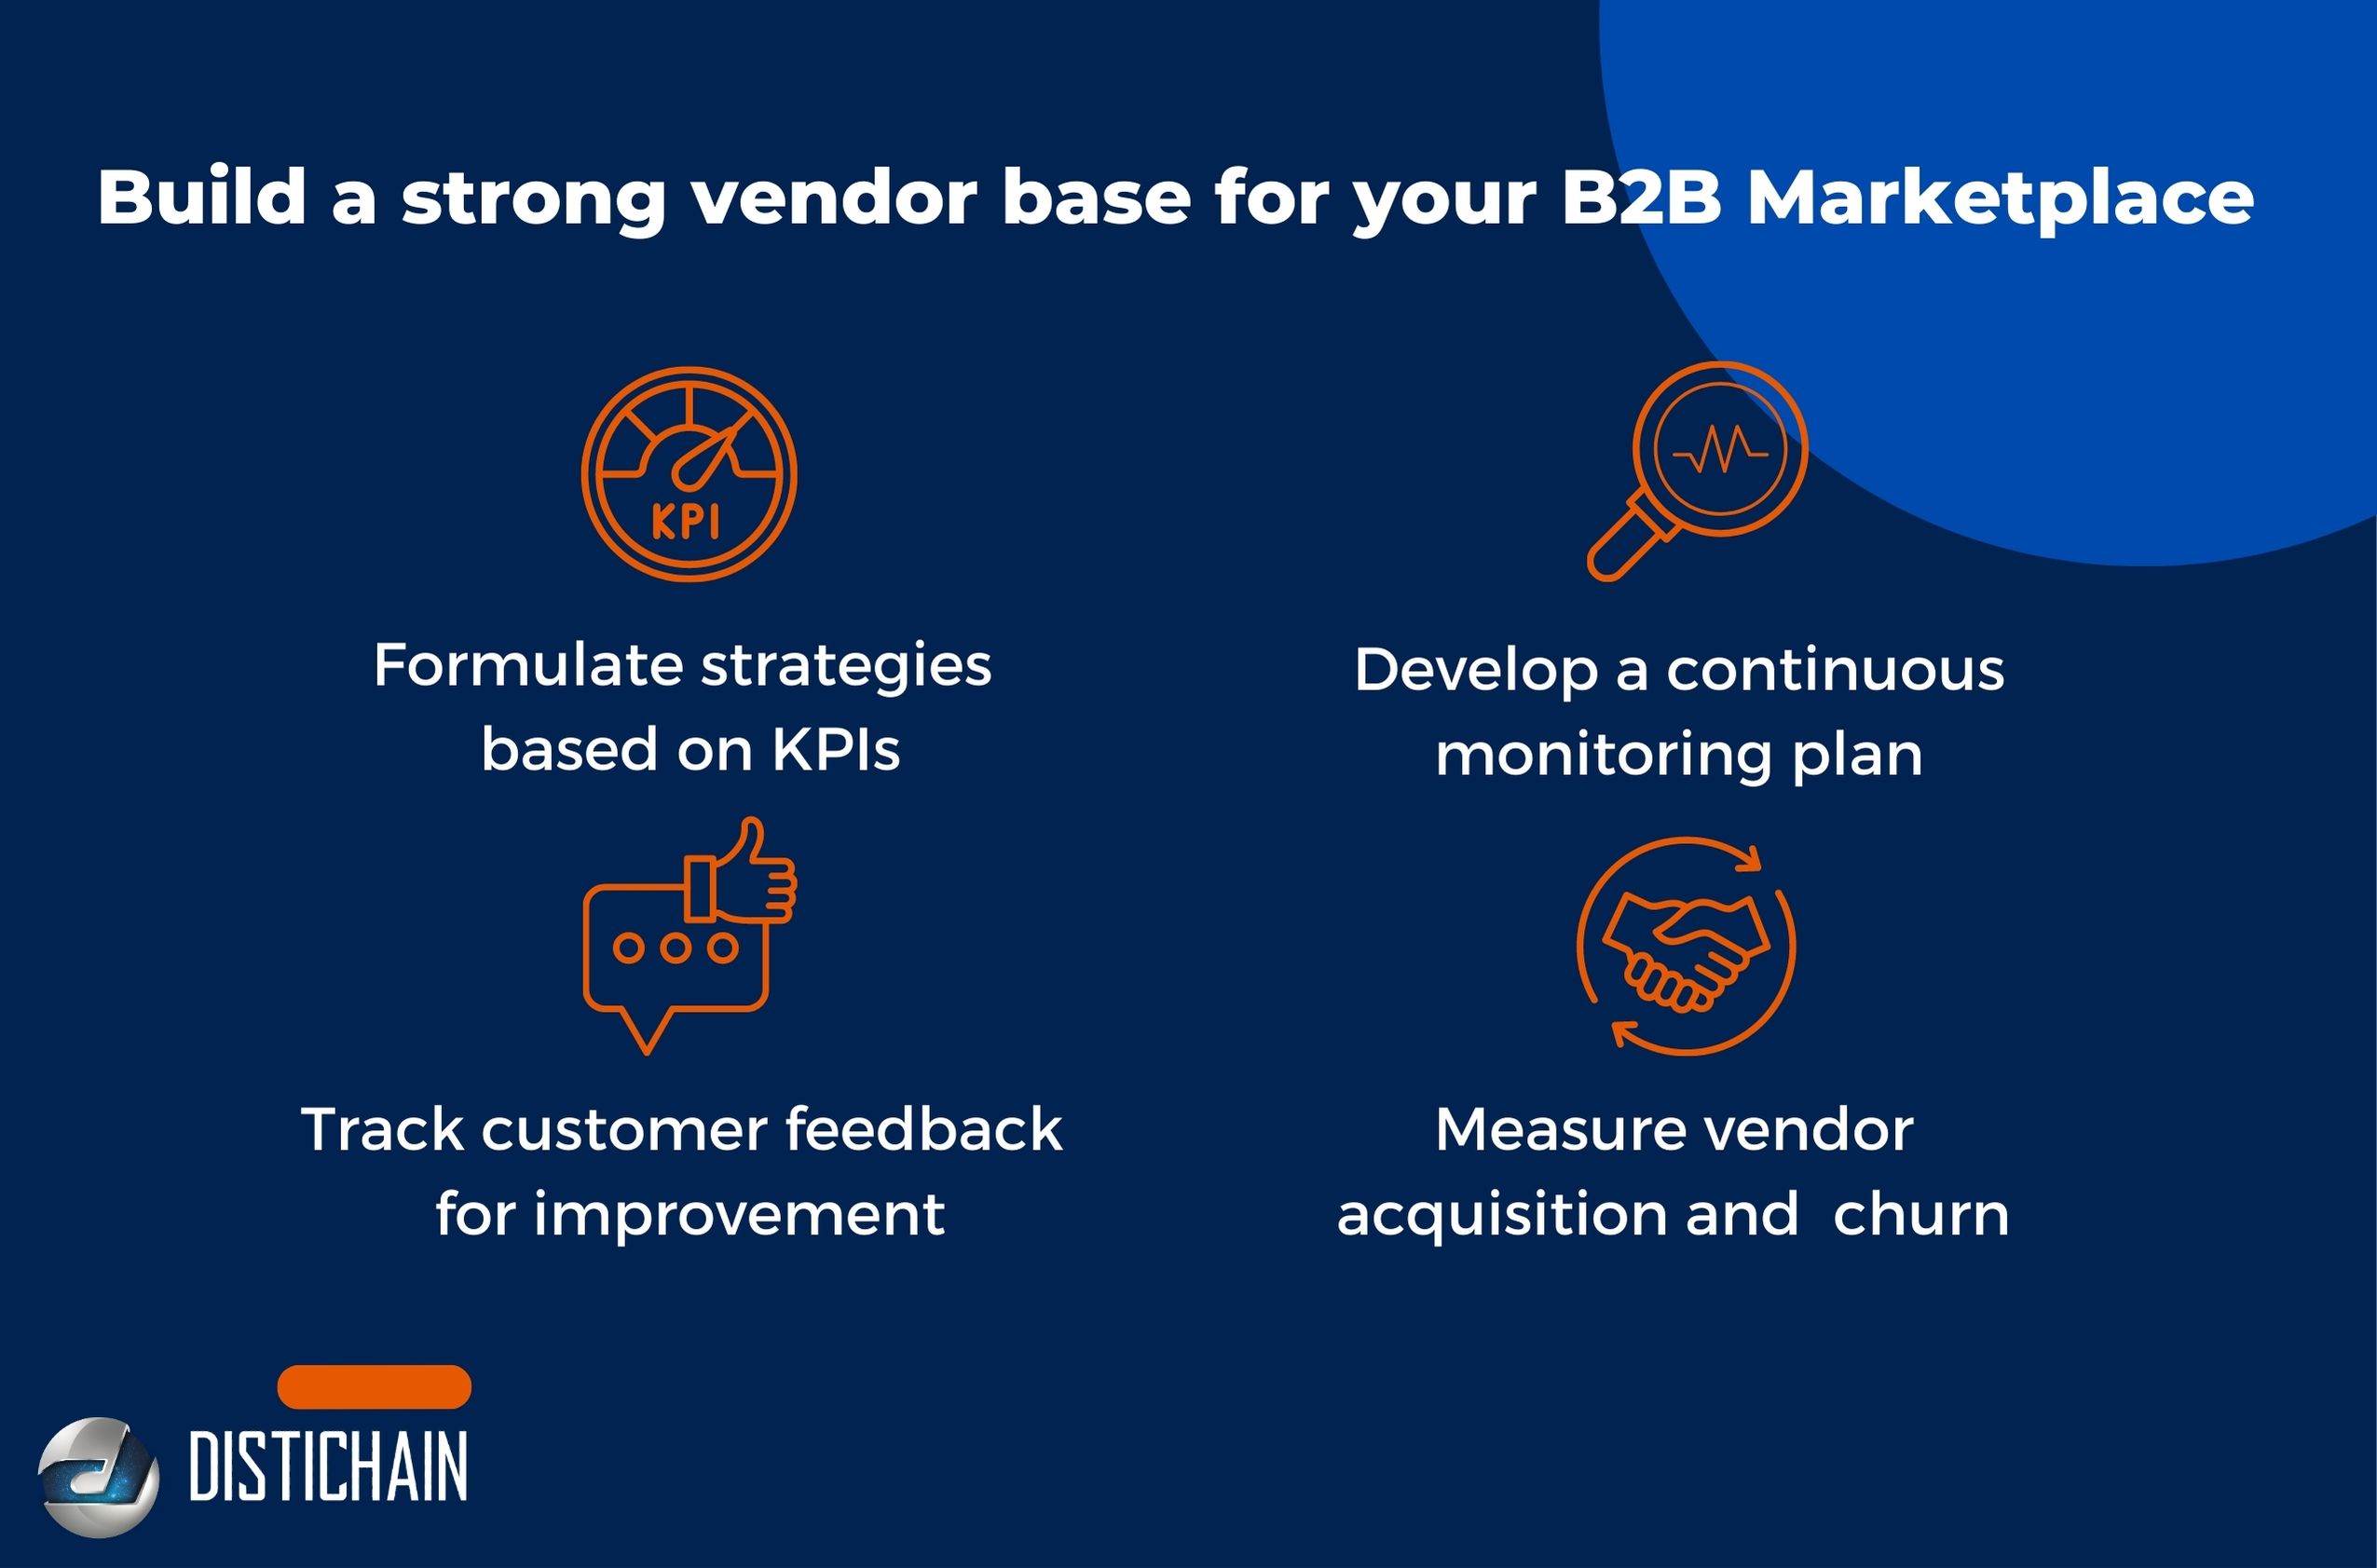 Distichain Strategies for building a strong vendor base for B2B marketplace